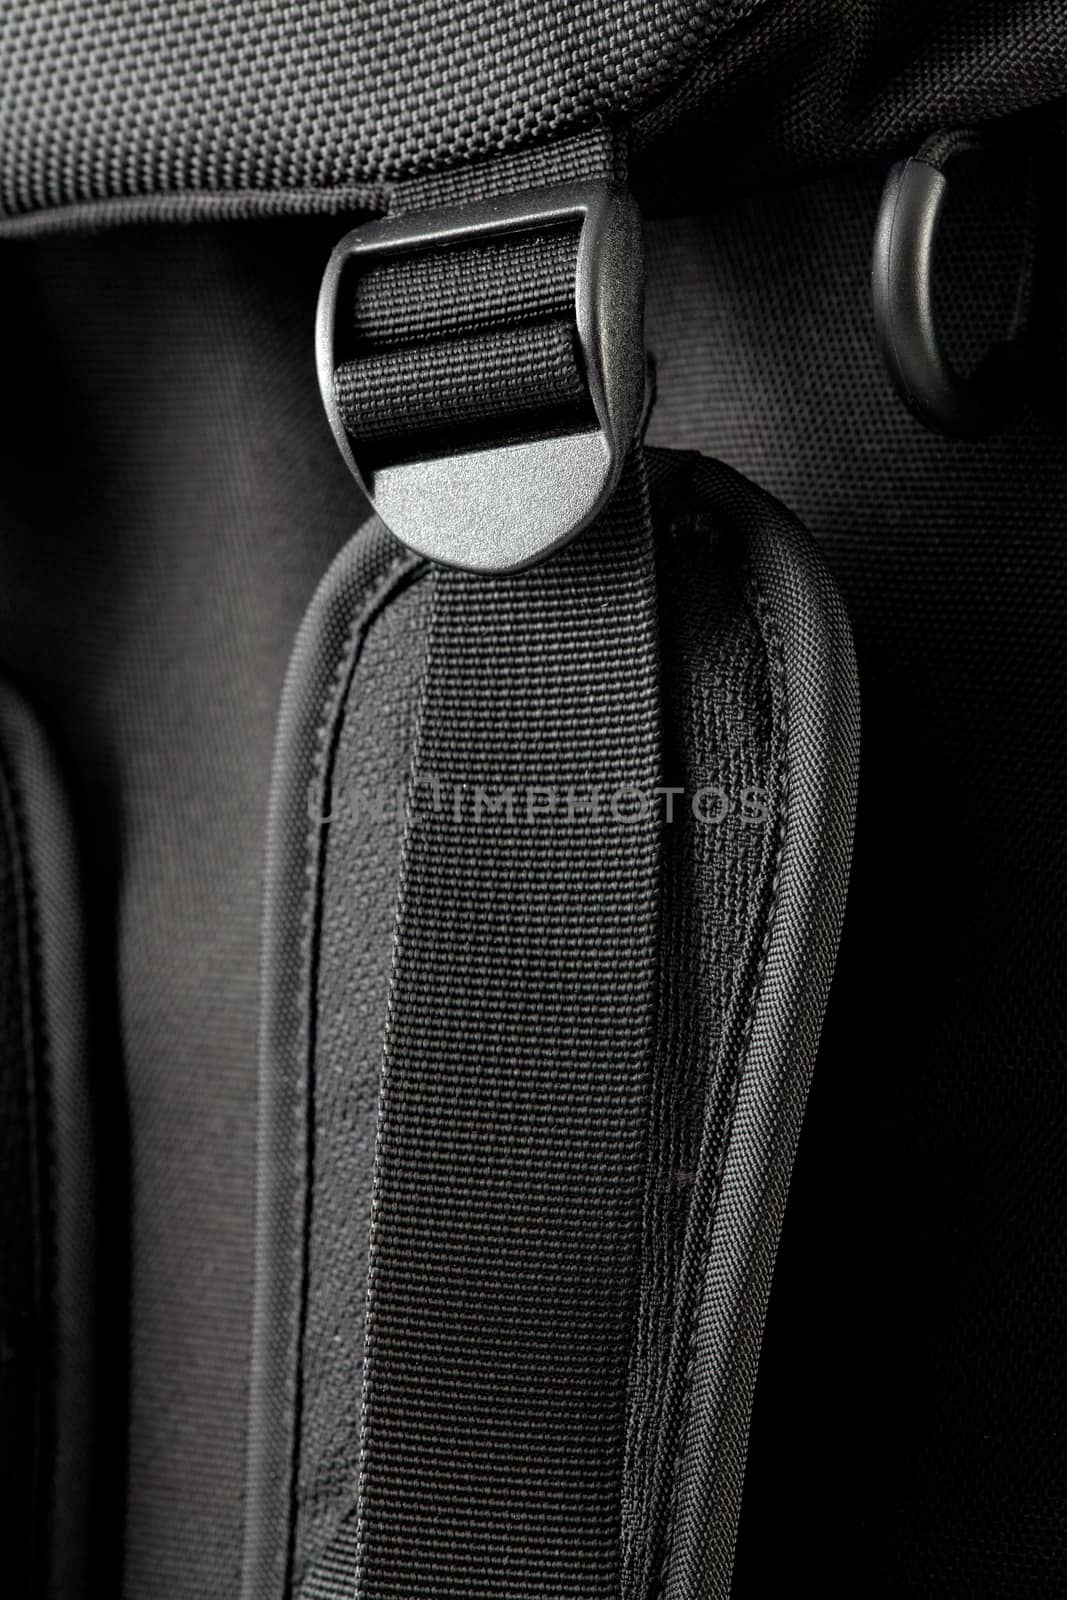 Backpack details by Portokalis